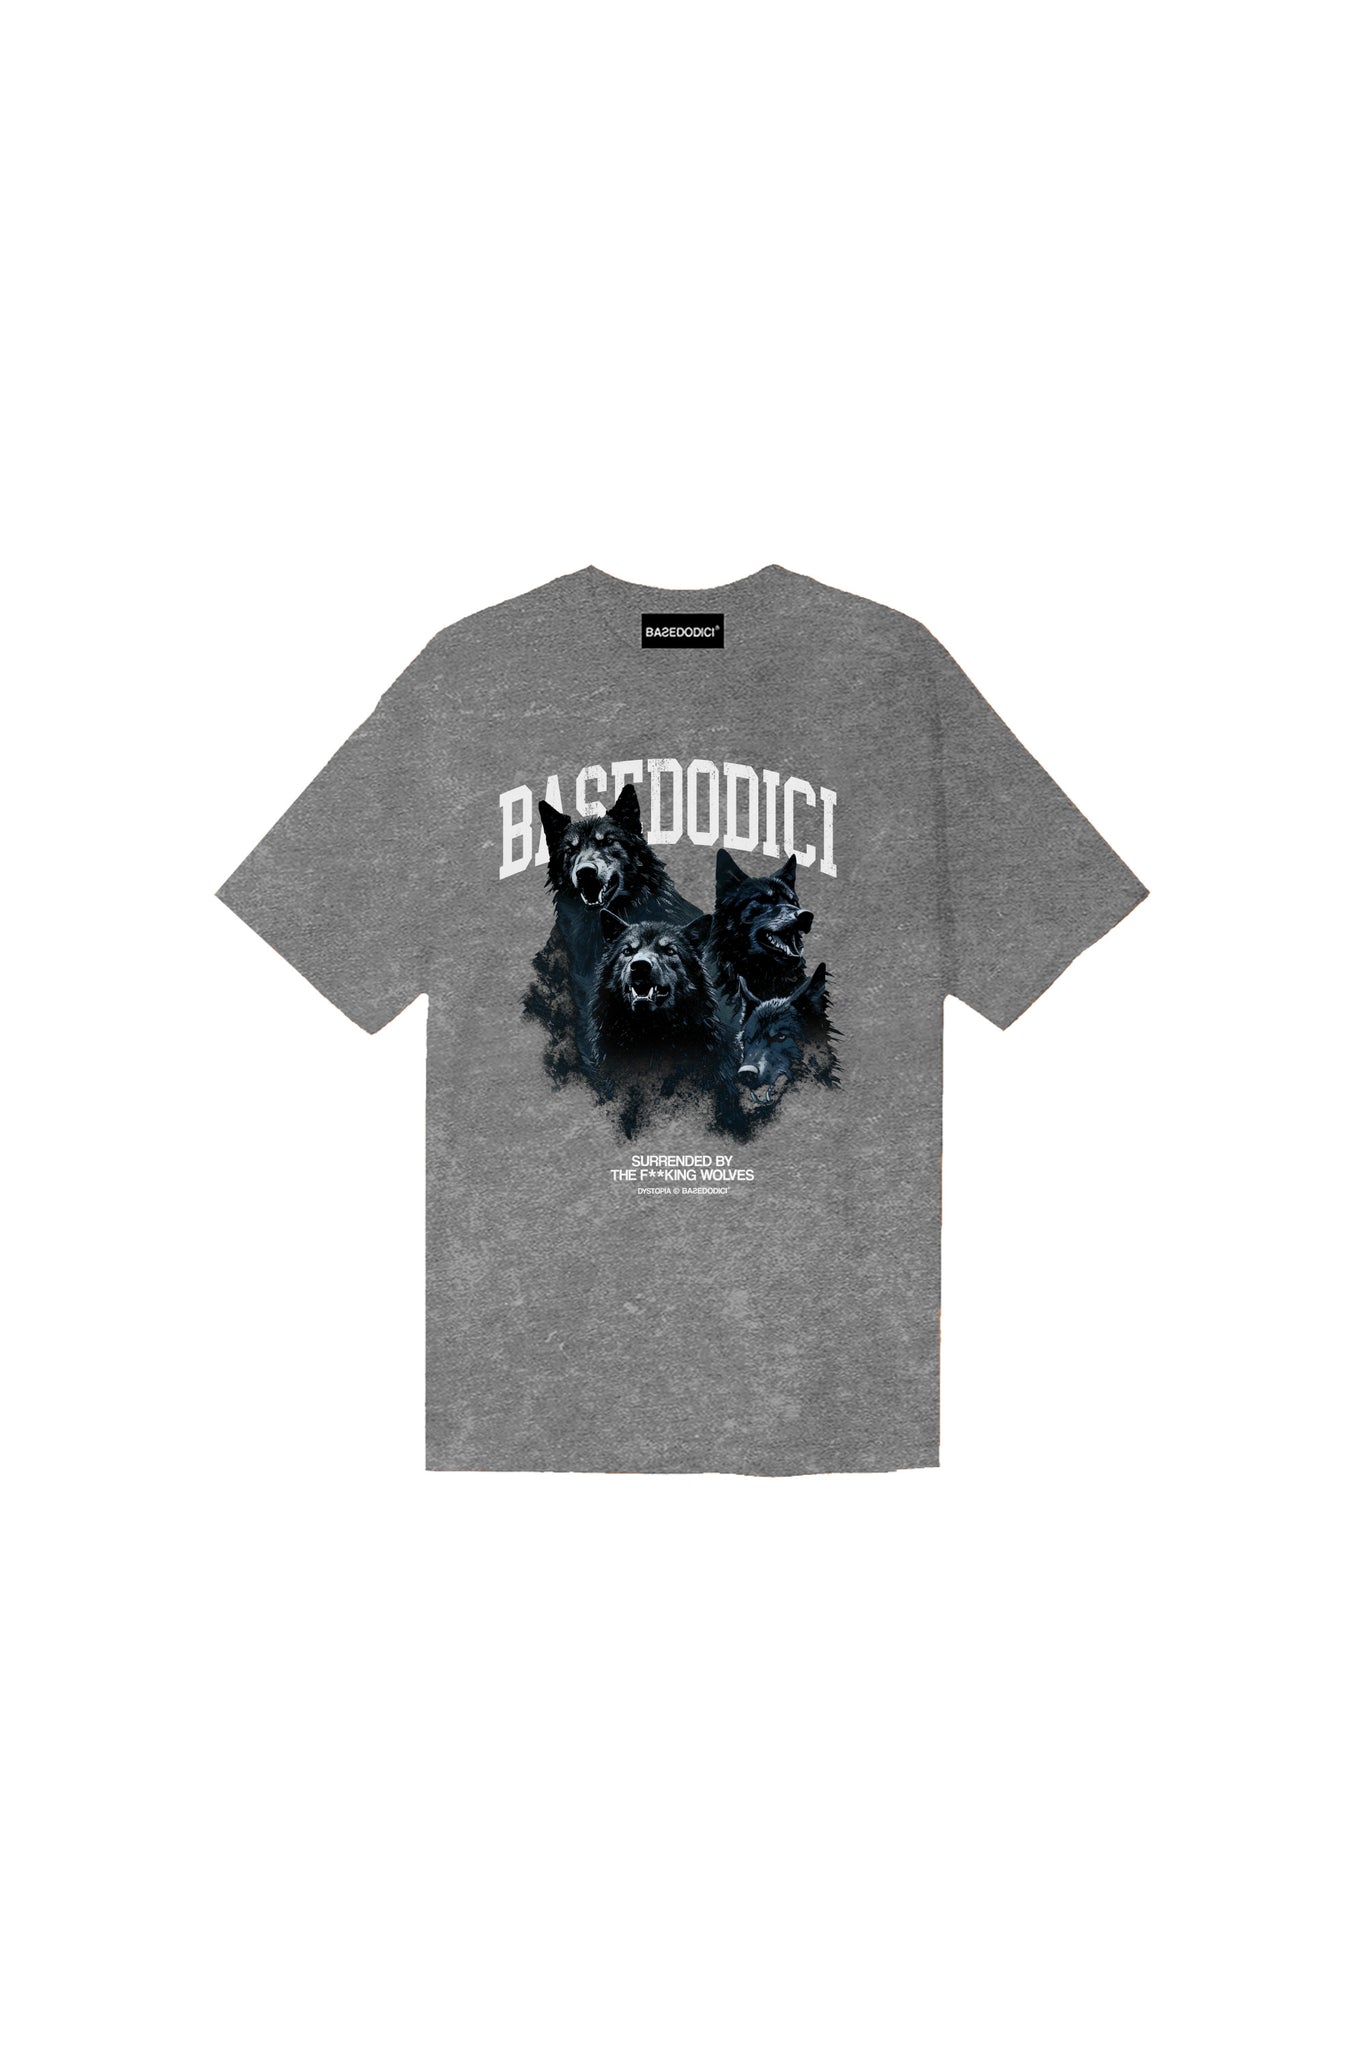 “DYSTOPIA” Wolves Stone Washed T-Shirt